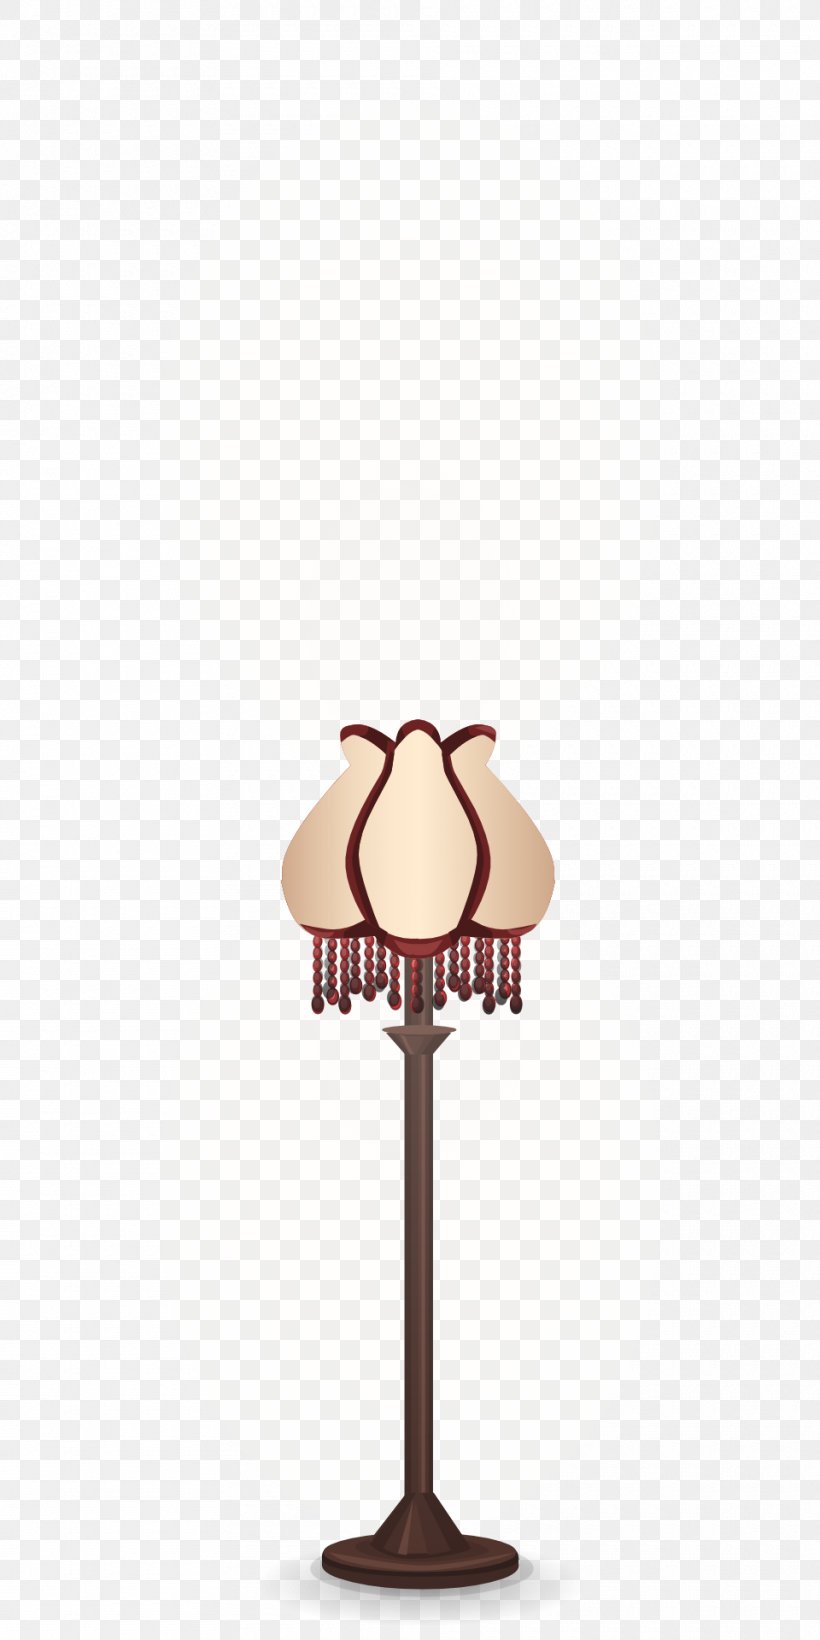 Light Fixture Lamp Lighting, PNG, 960x1920px, Light, Drawing, Floor, Lamp, Lamp Shades Download Free